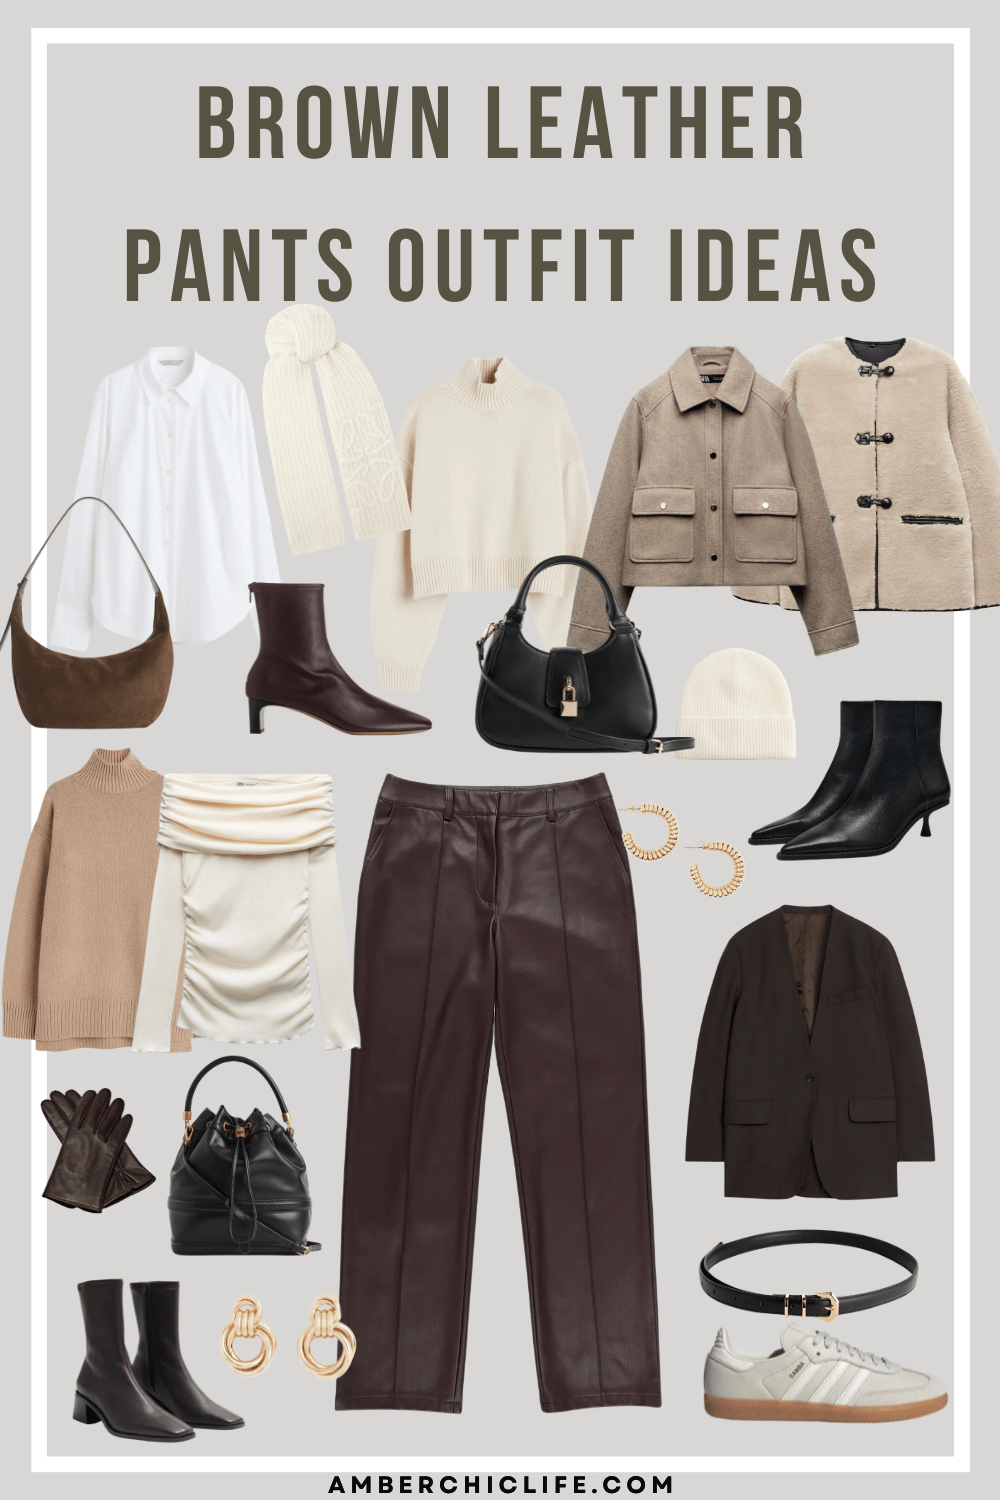 outfit ideas with brown leather pants 🤎🐻 follow @jenniesuk for more inspo  • • #leatherpants #brownleather #outfitinspo #discov